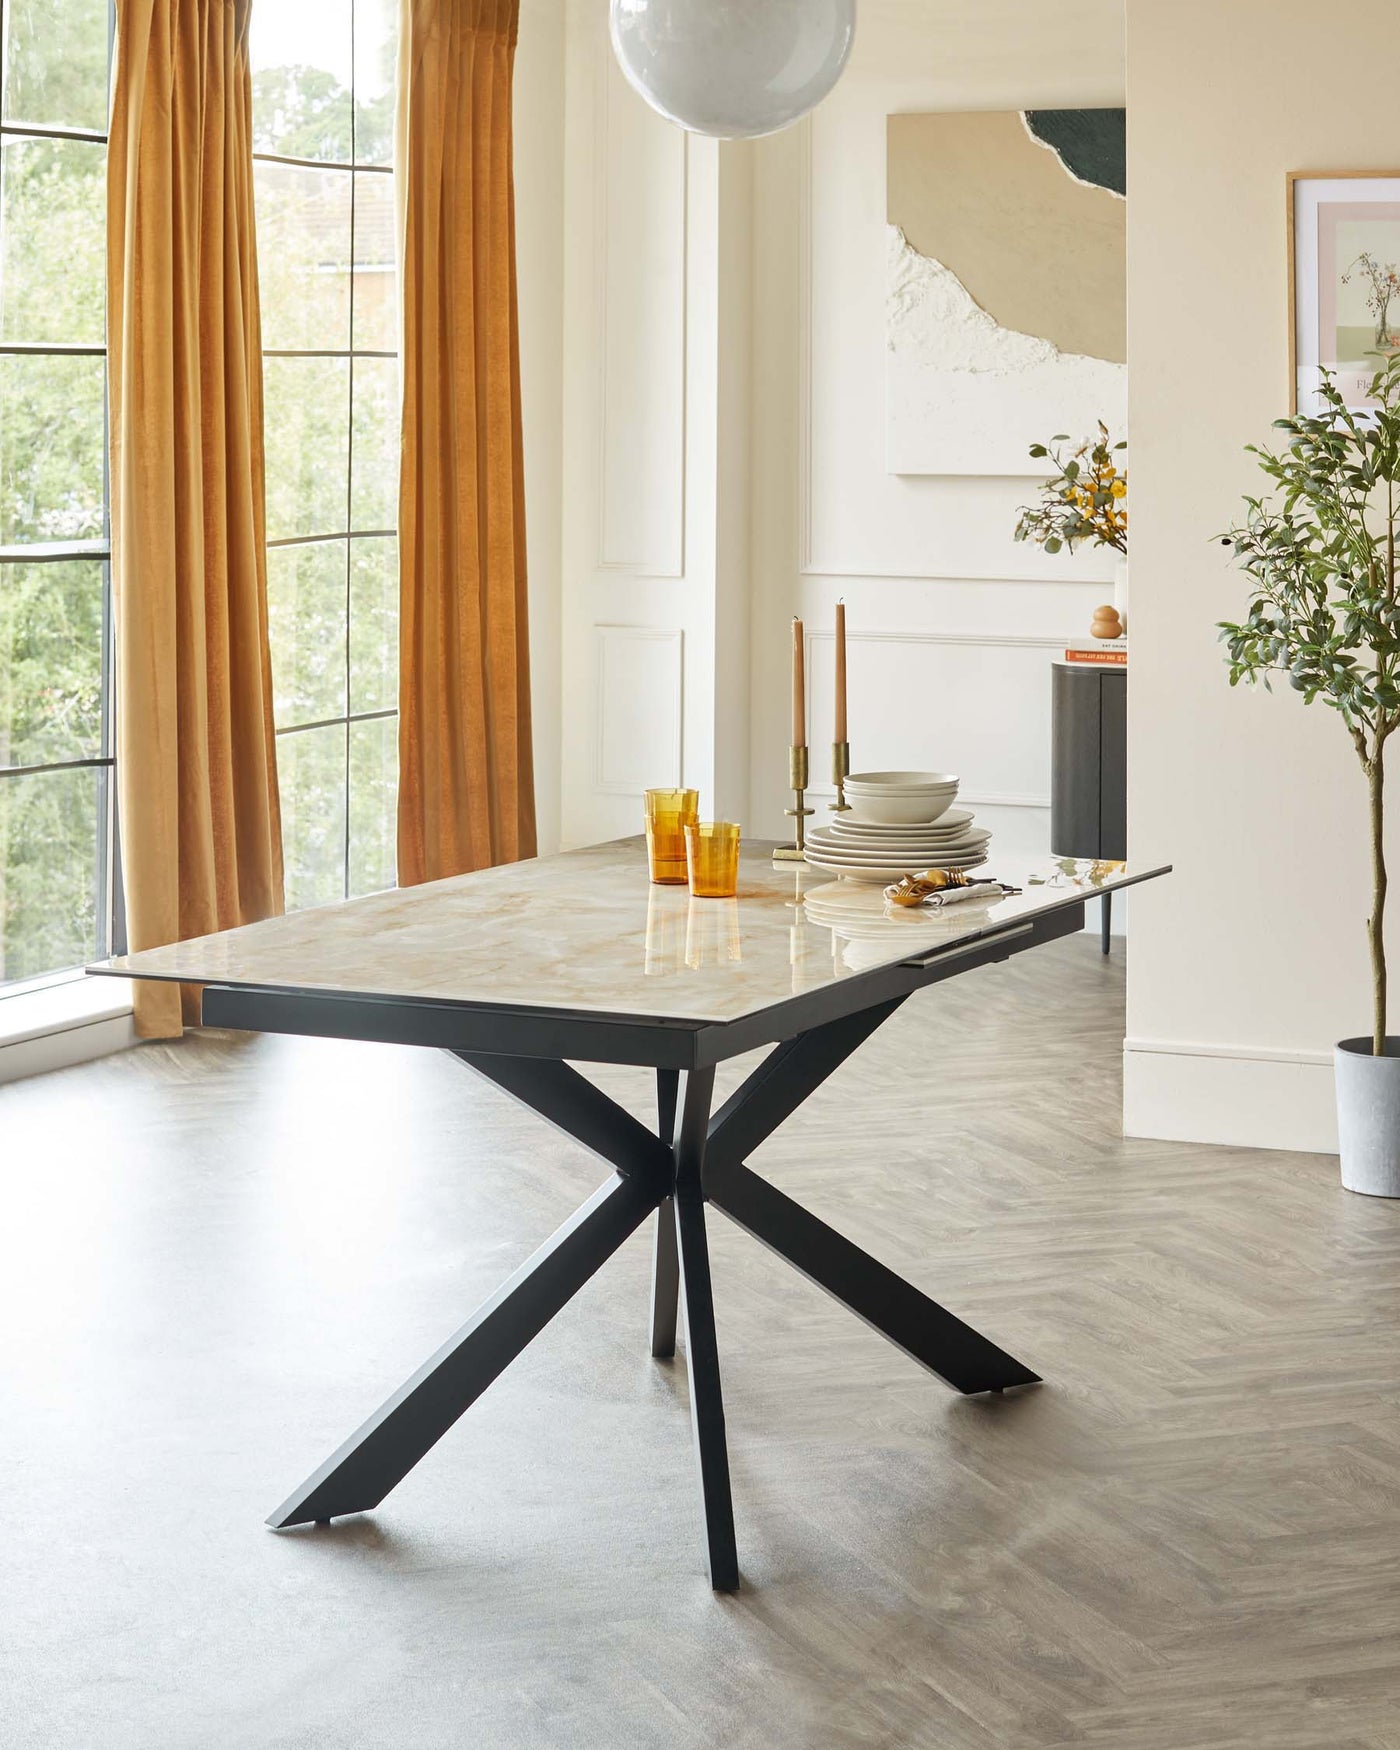 Elegant modern dining table with a marble tabletop and a geometric black metal base.